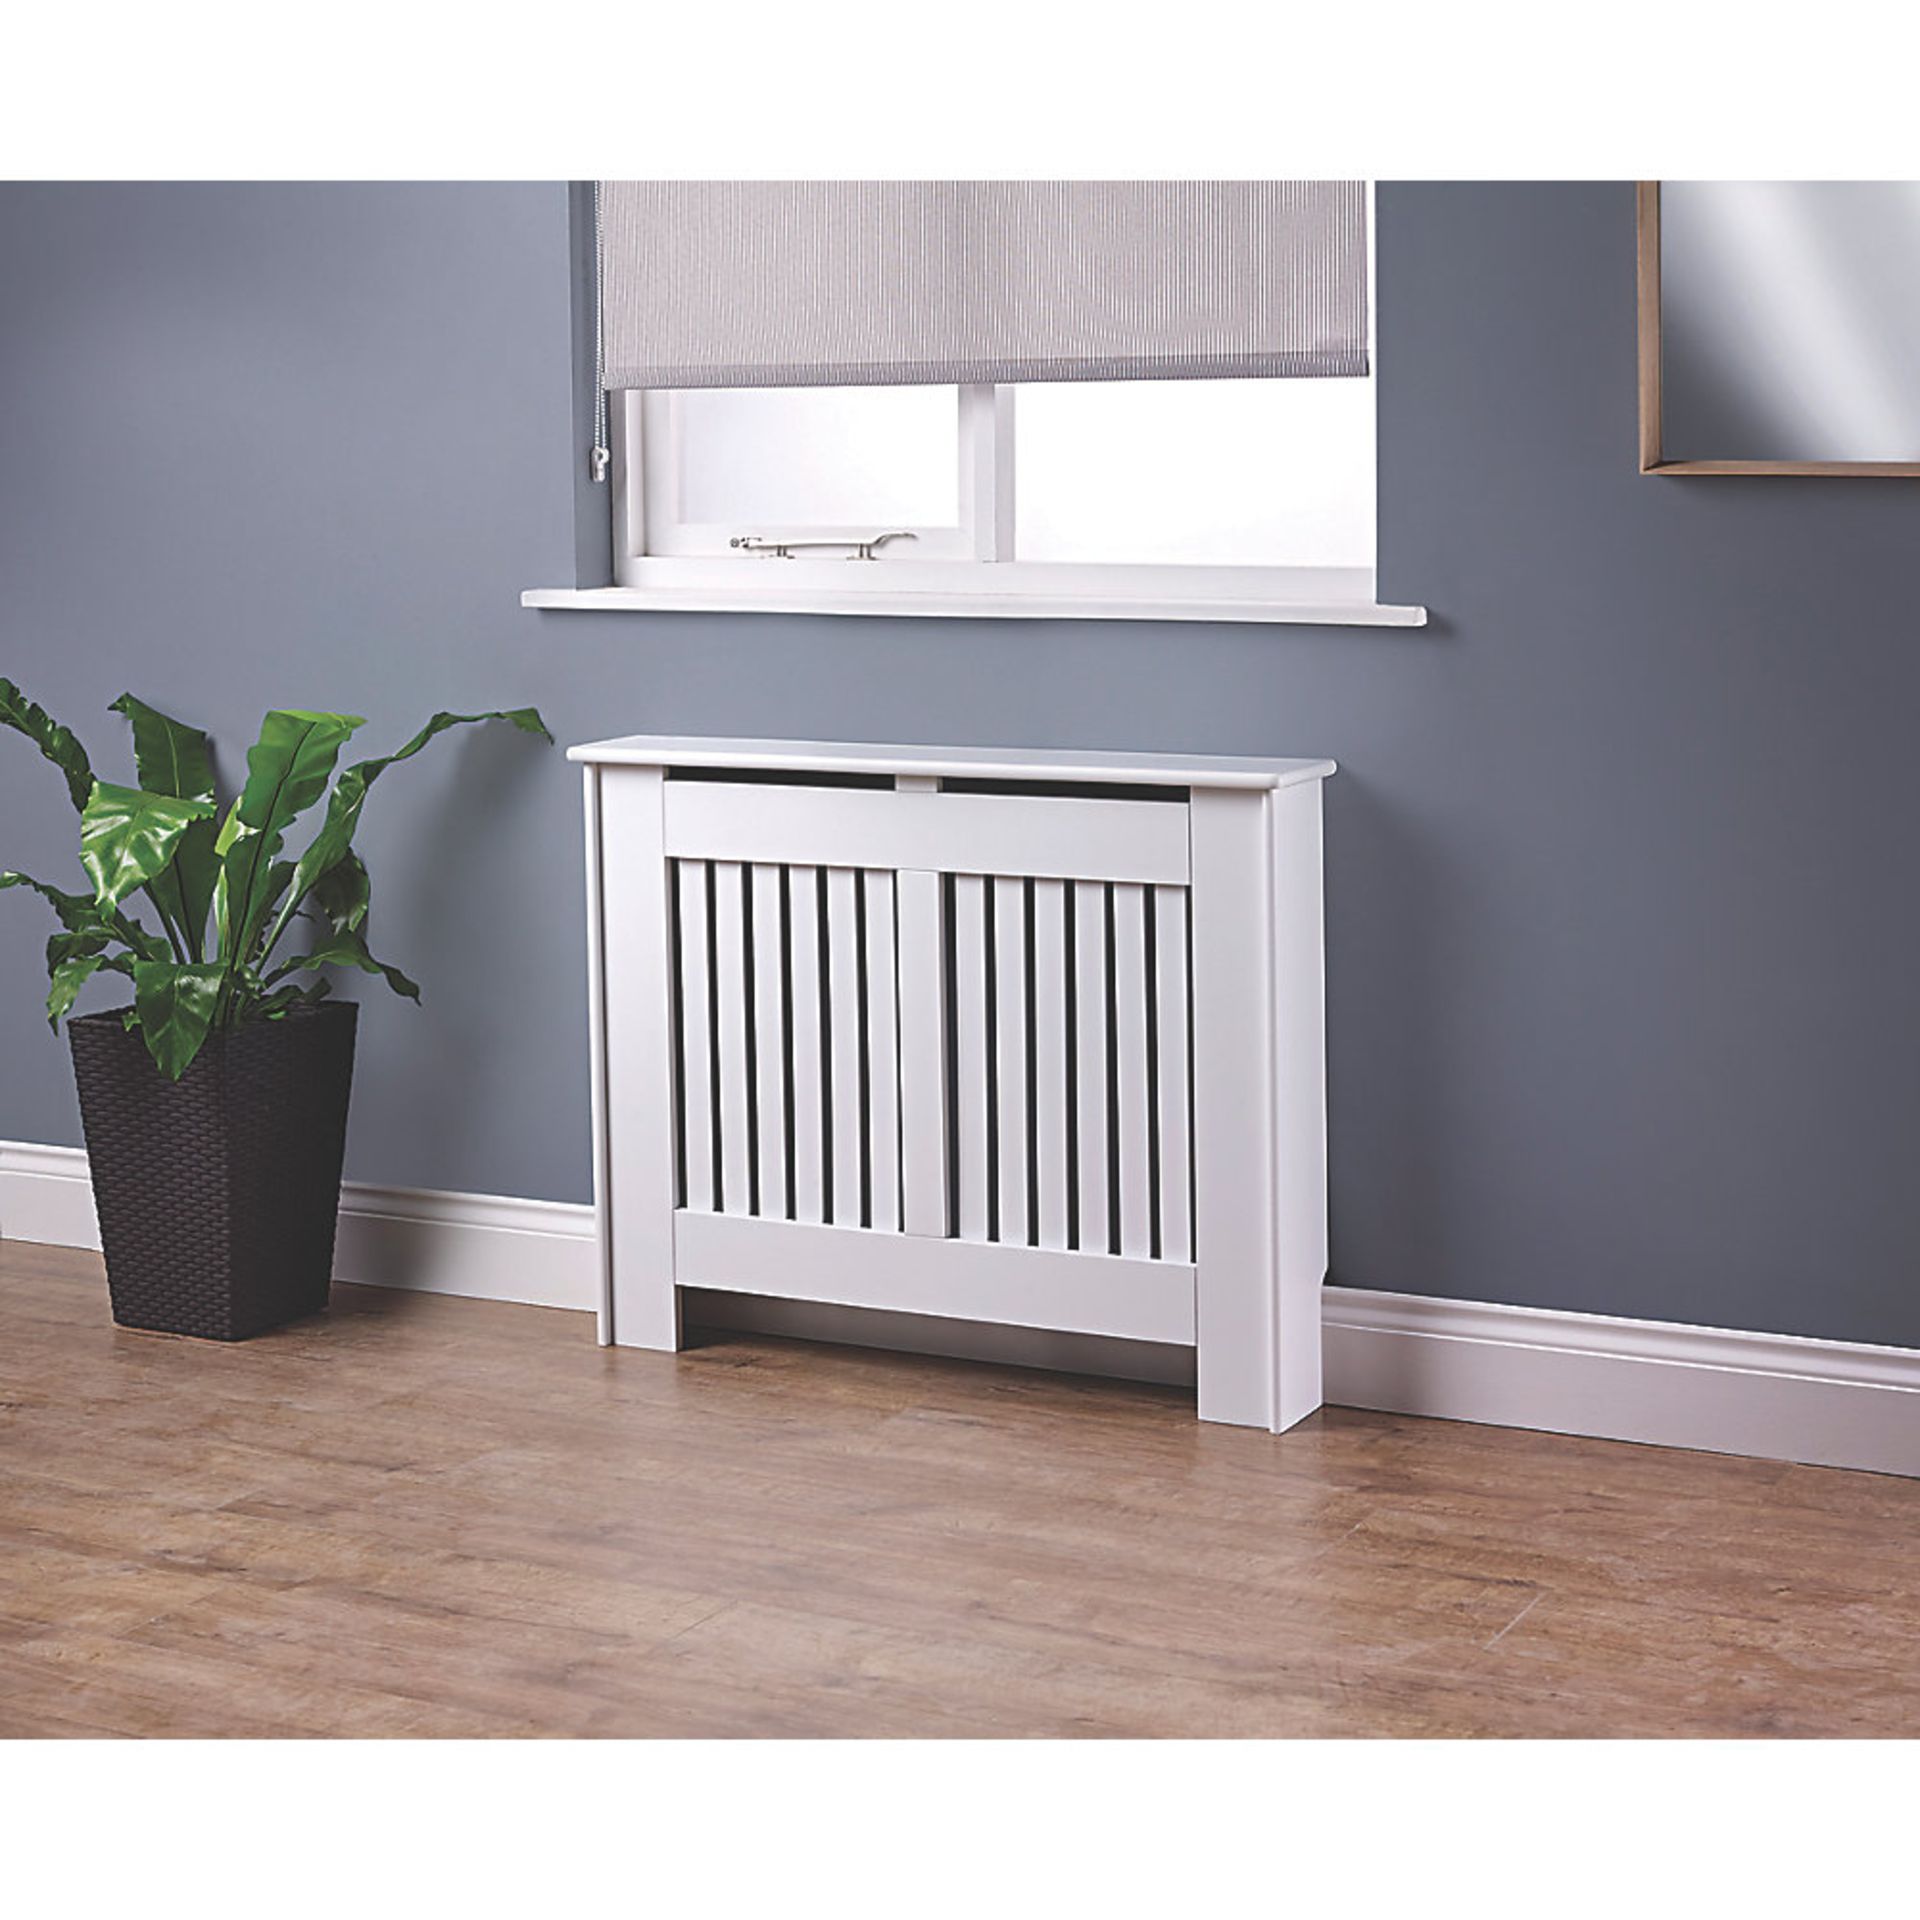 (UR78) 1020 X 180 X 800MM CONTEMPORARY KENSINGTON RADIATOR CABINET SMALL WHITE. RRP £99.99. I... - Image 3 of 3